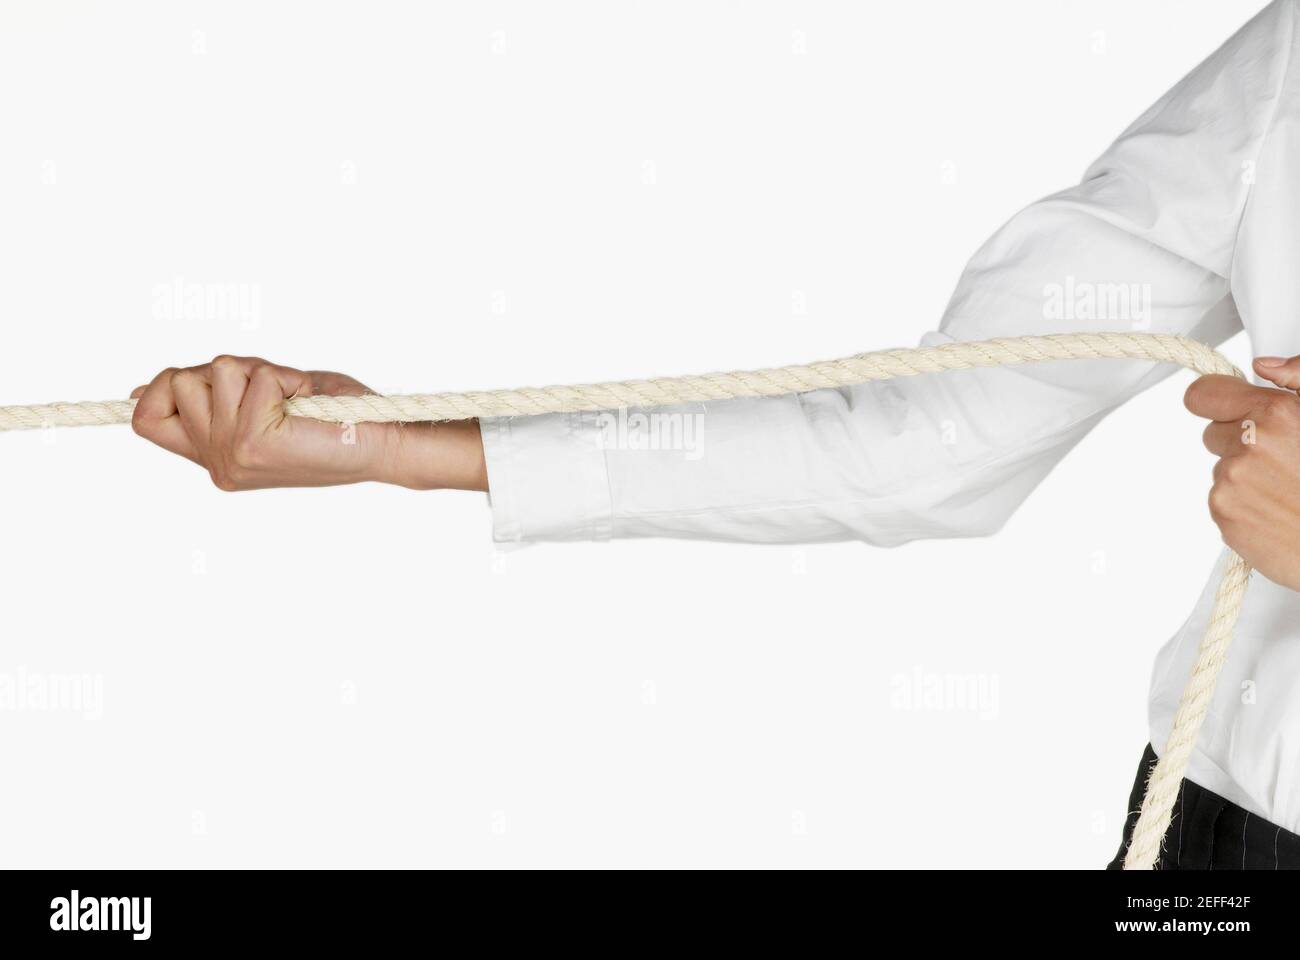 People pulling rope, close-up stock photo